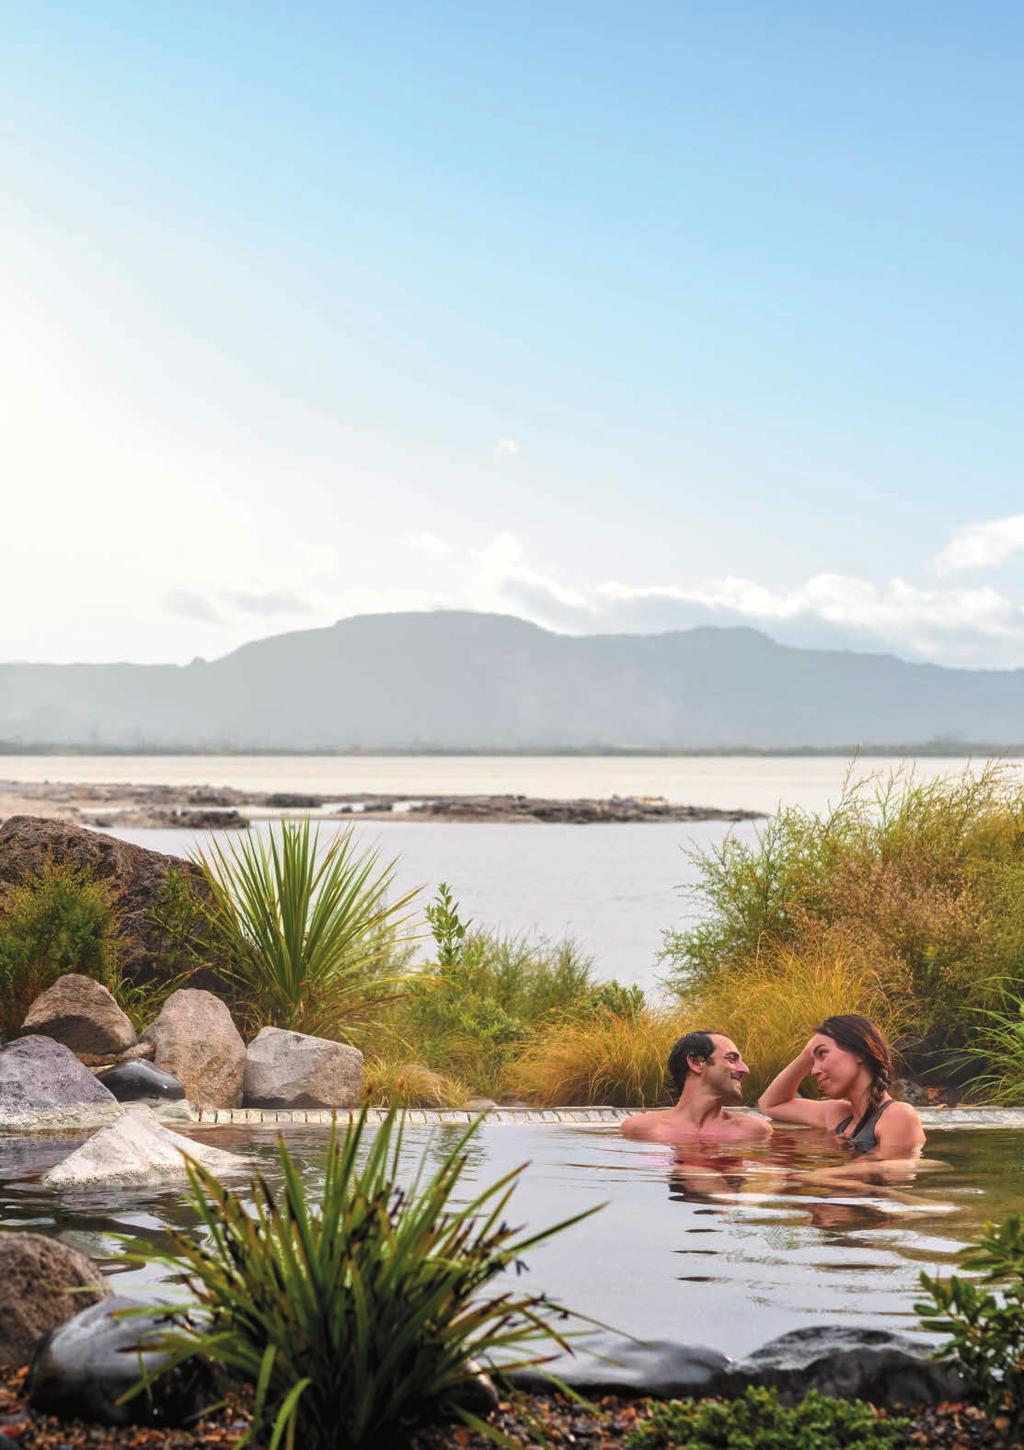 VISITOR SATISFTION UK visitors have an excellent experience in New Zealand with high satisfaction scores and many are likely to recommend New Zealand as a destination. Rotorua newzealand.